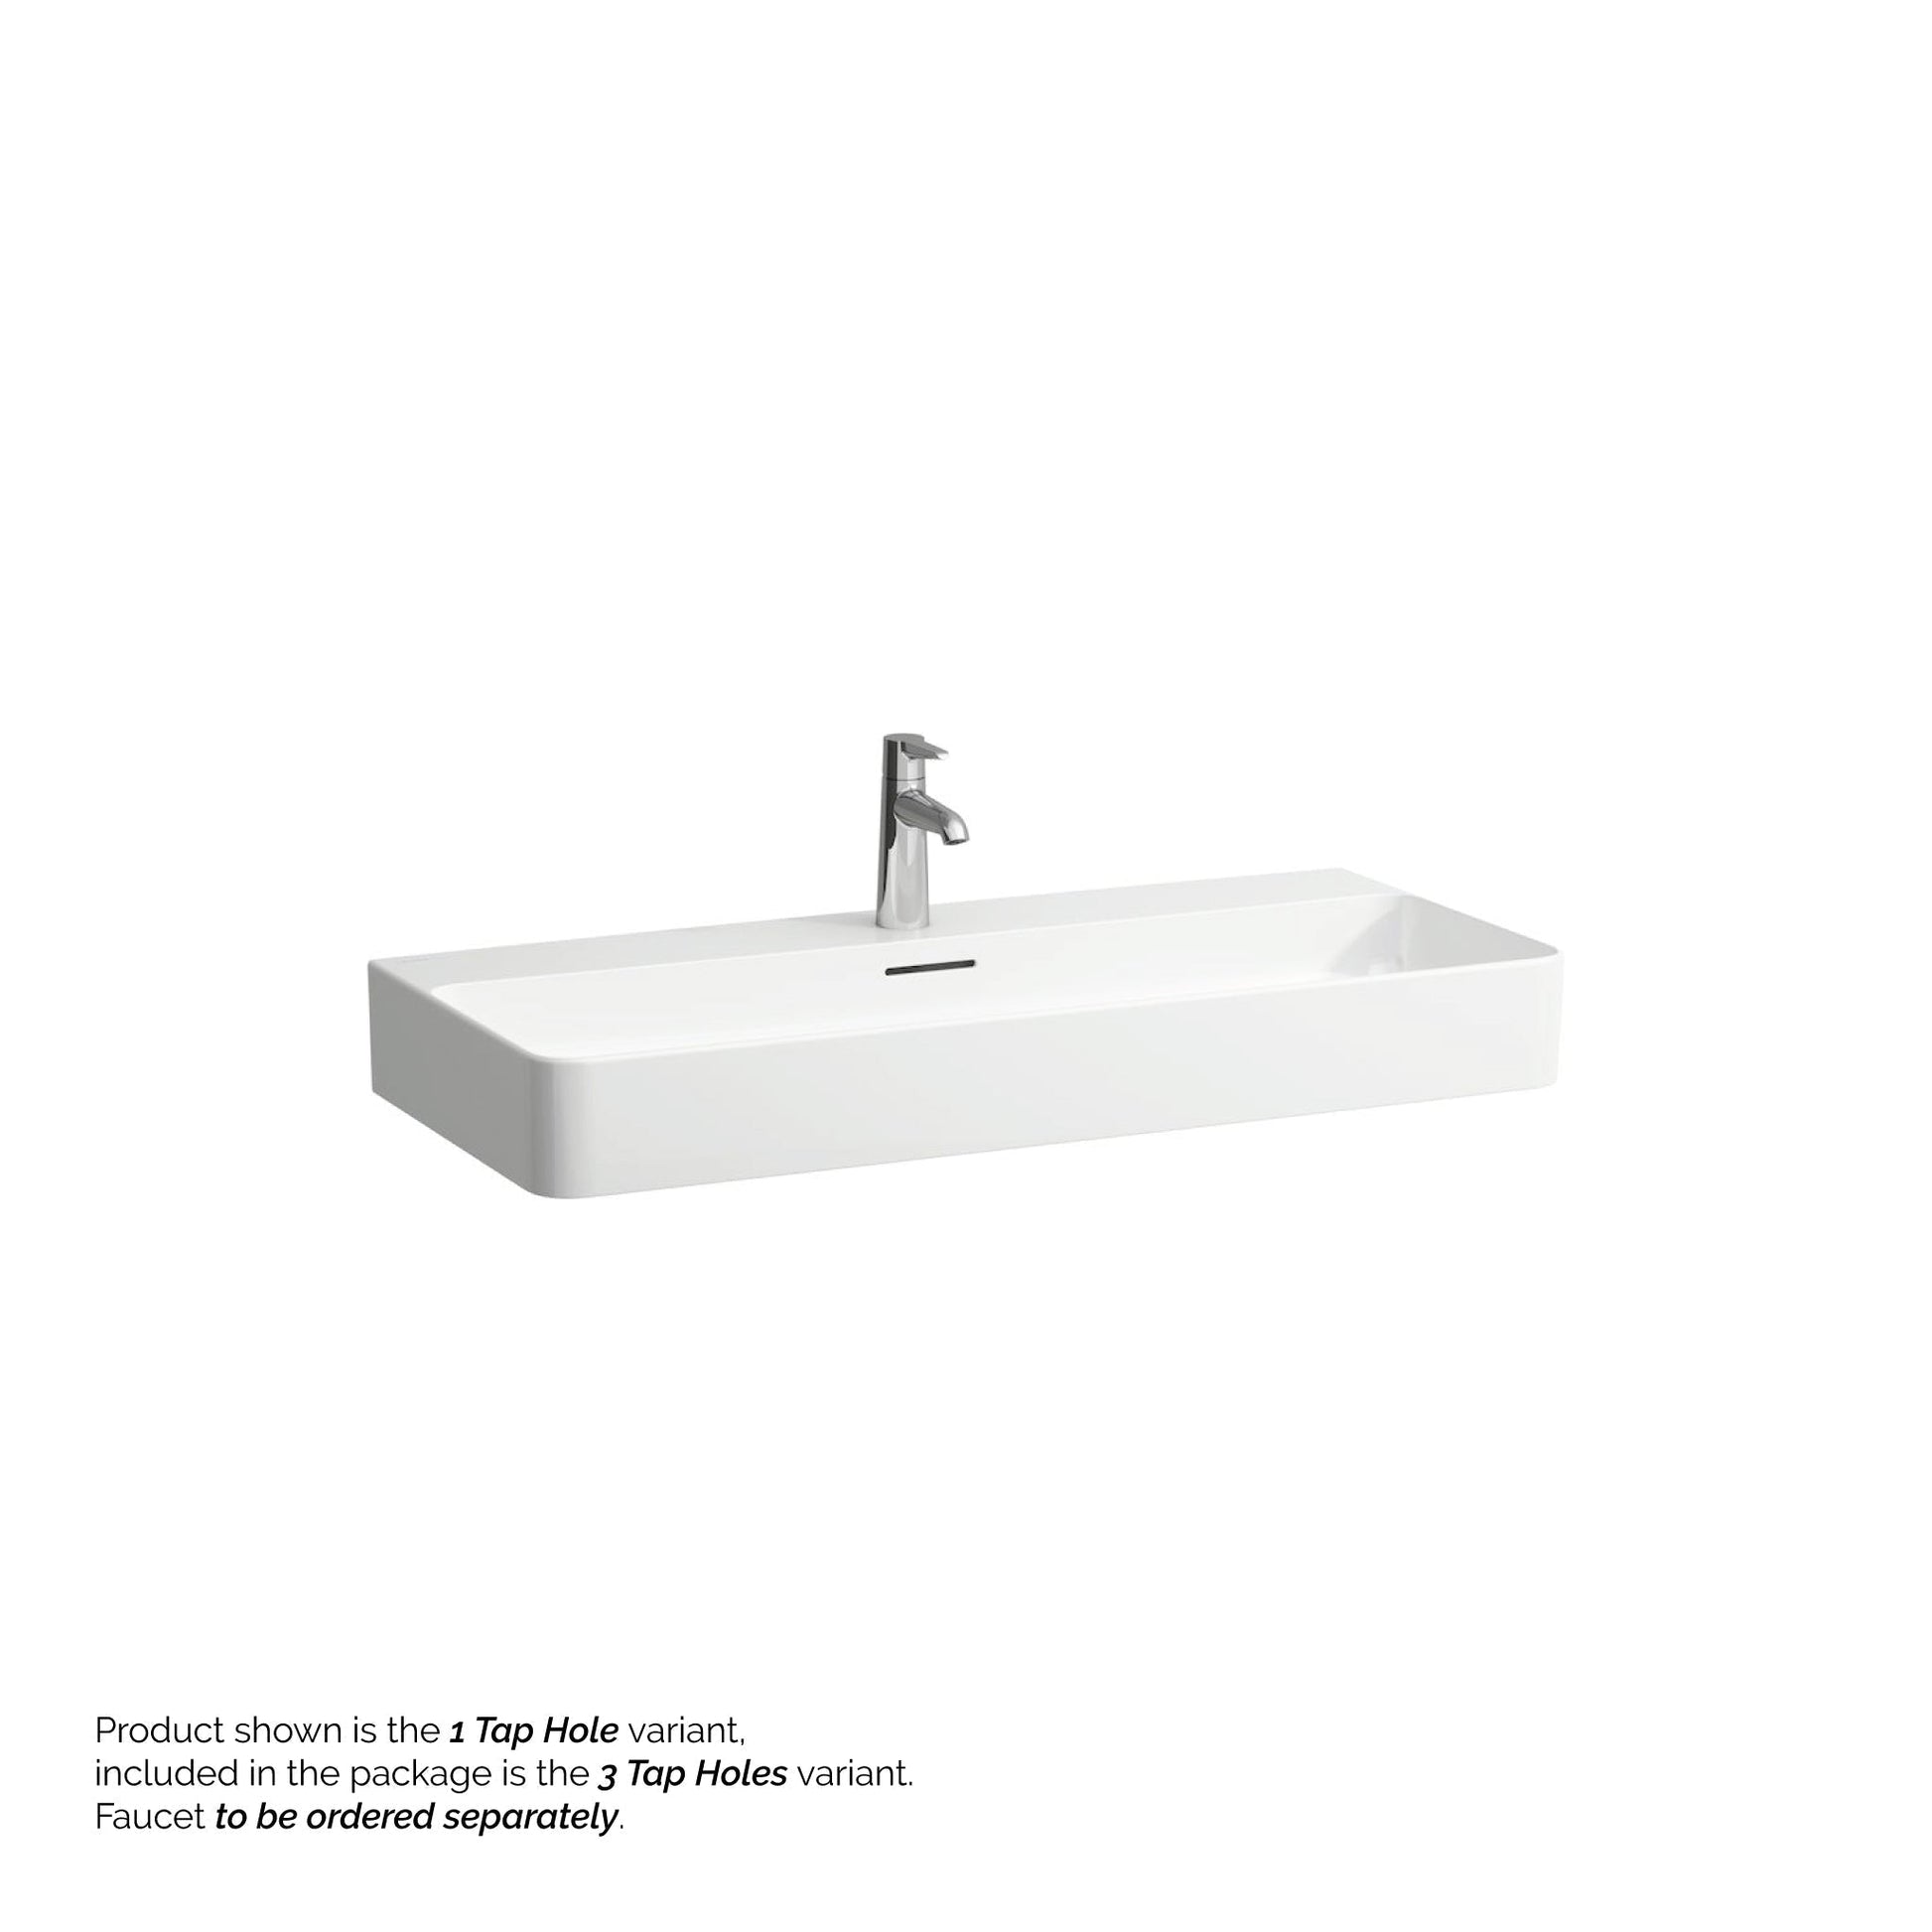 Laufen Val 37" x 17" White Ceramic Countertop Bathroom Sink With 3 Faucet Holes